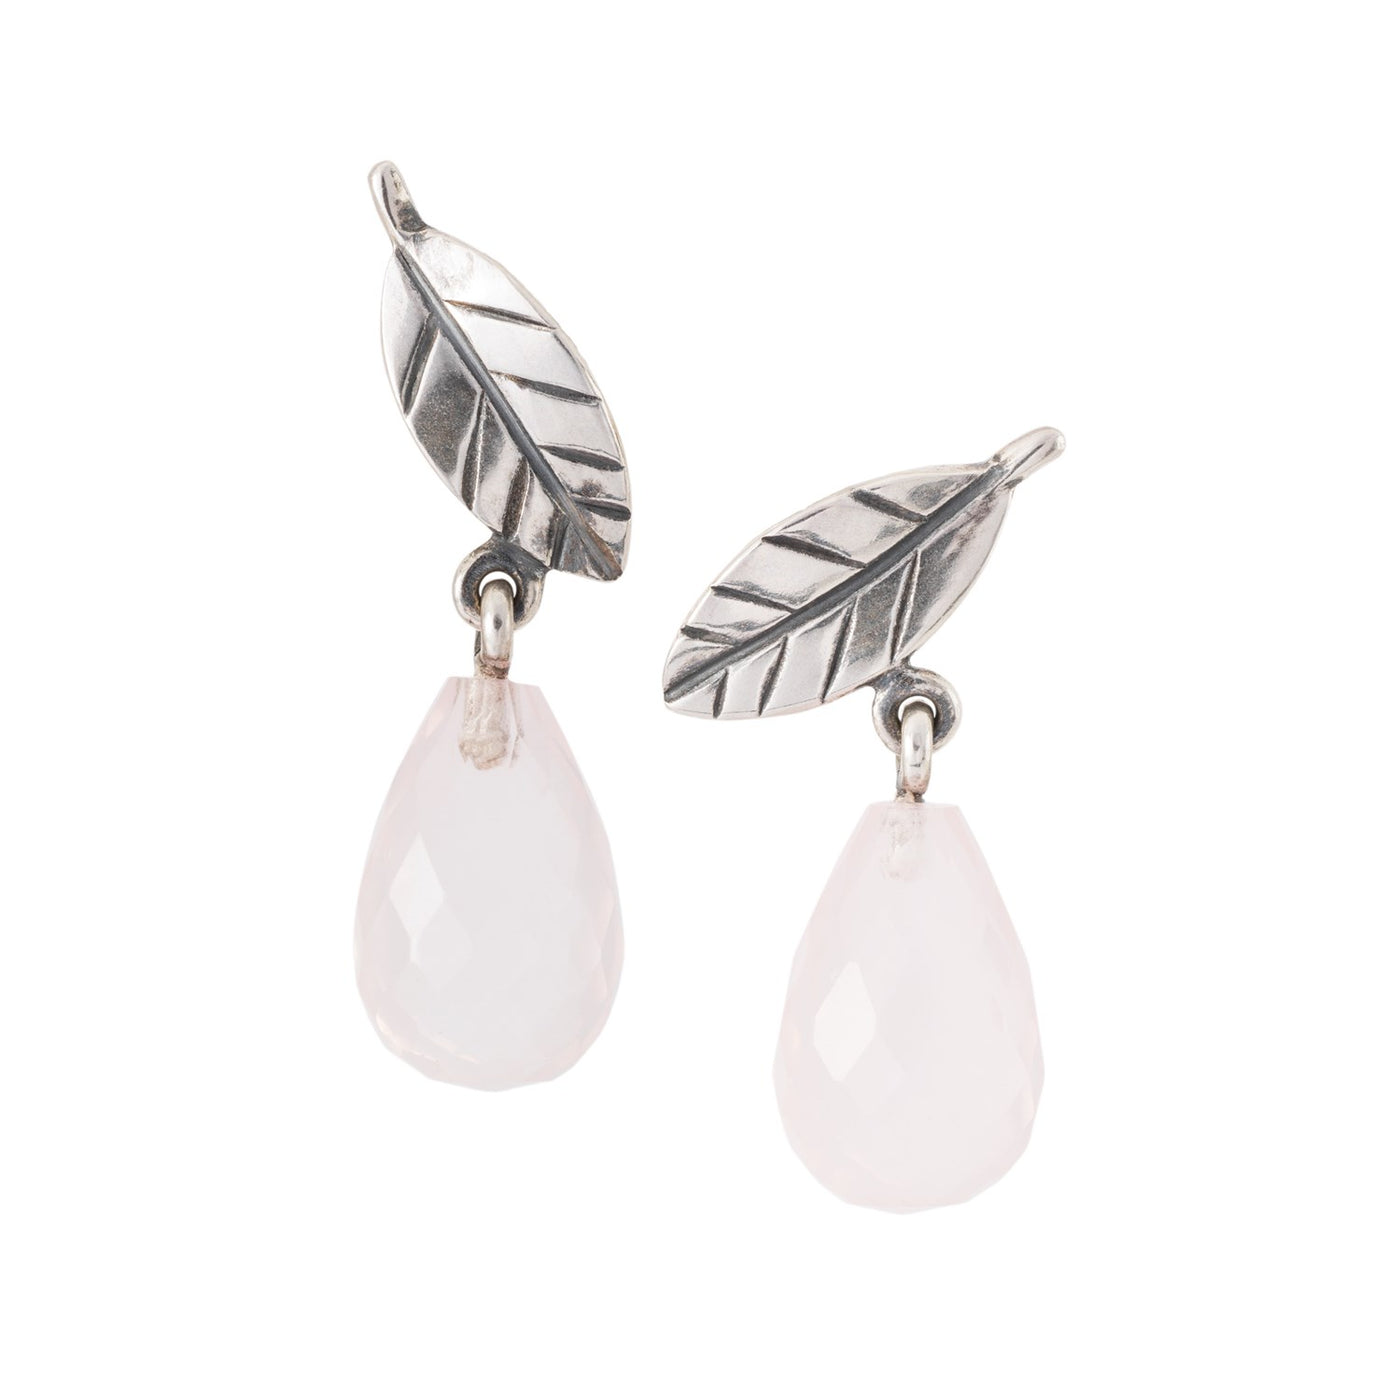 Lovely silver studs with an intricate design featuring delicate leaves with a drop of faceted Rose Quartz hanging from it, with post backs for easy wearing.